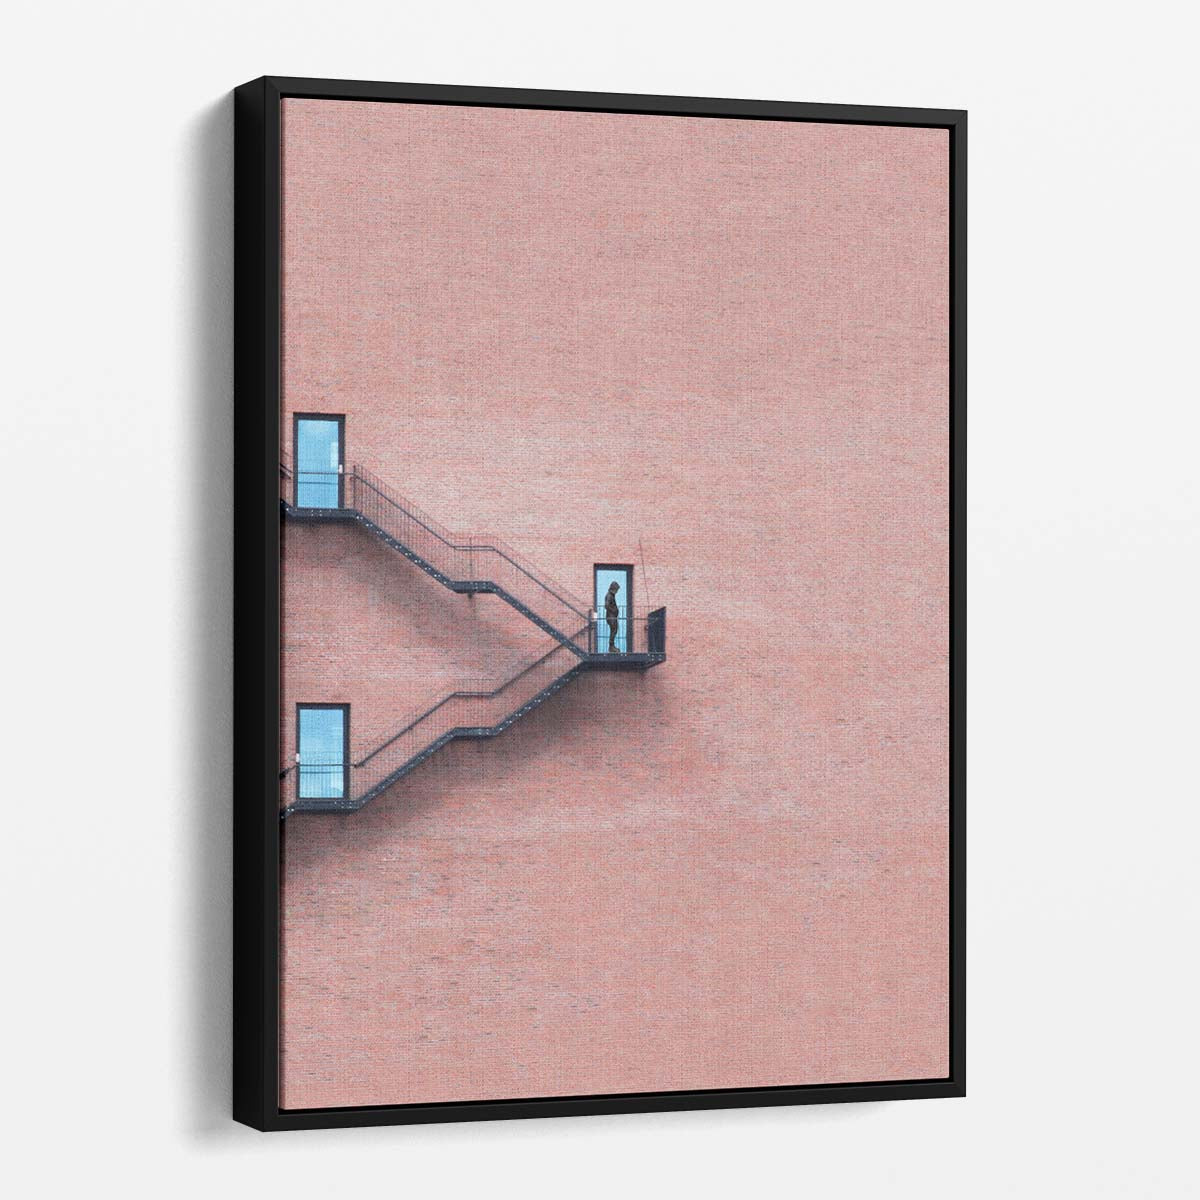 Minimalist Pink Staircase Architecture Photography - Urban Wall Art by Luxuriance Designs, made in USA